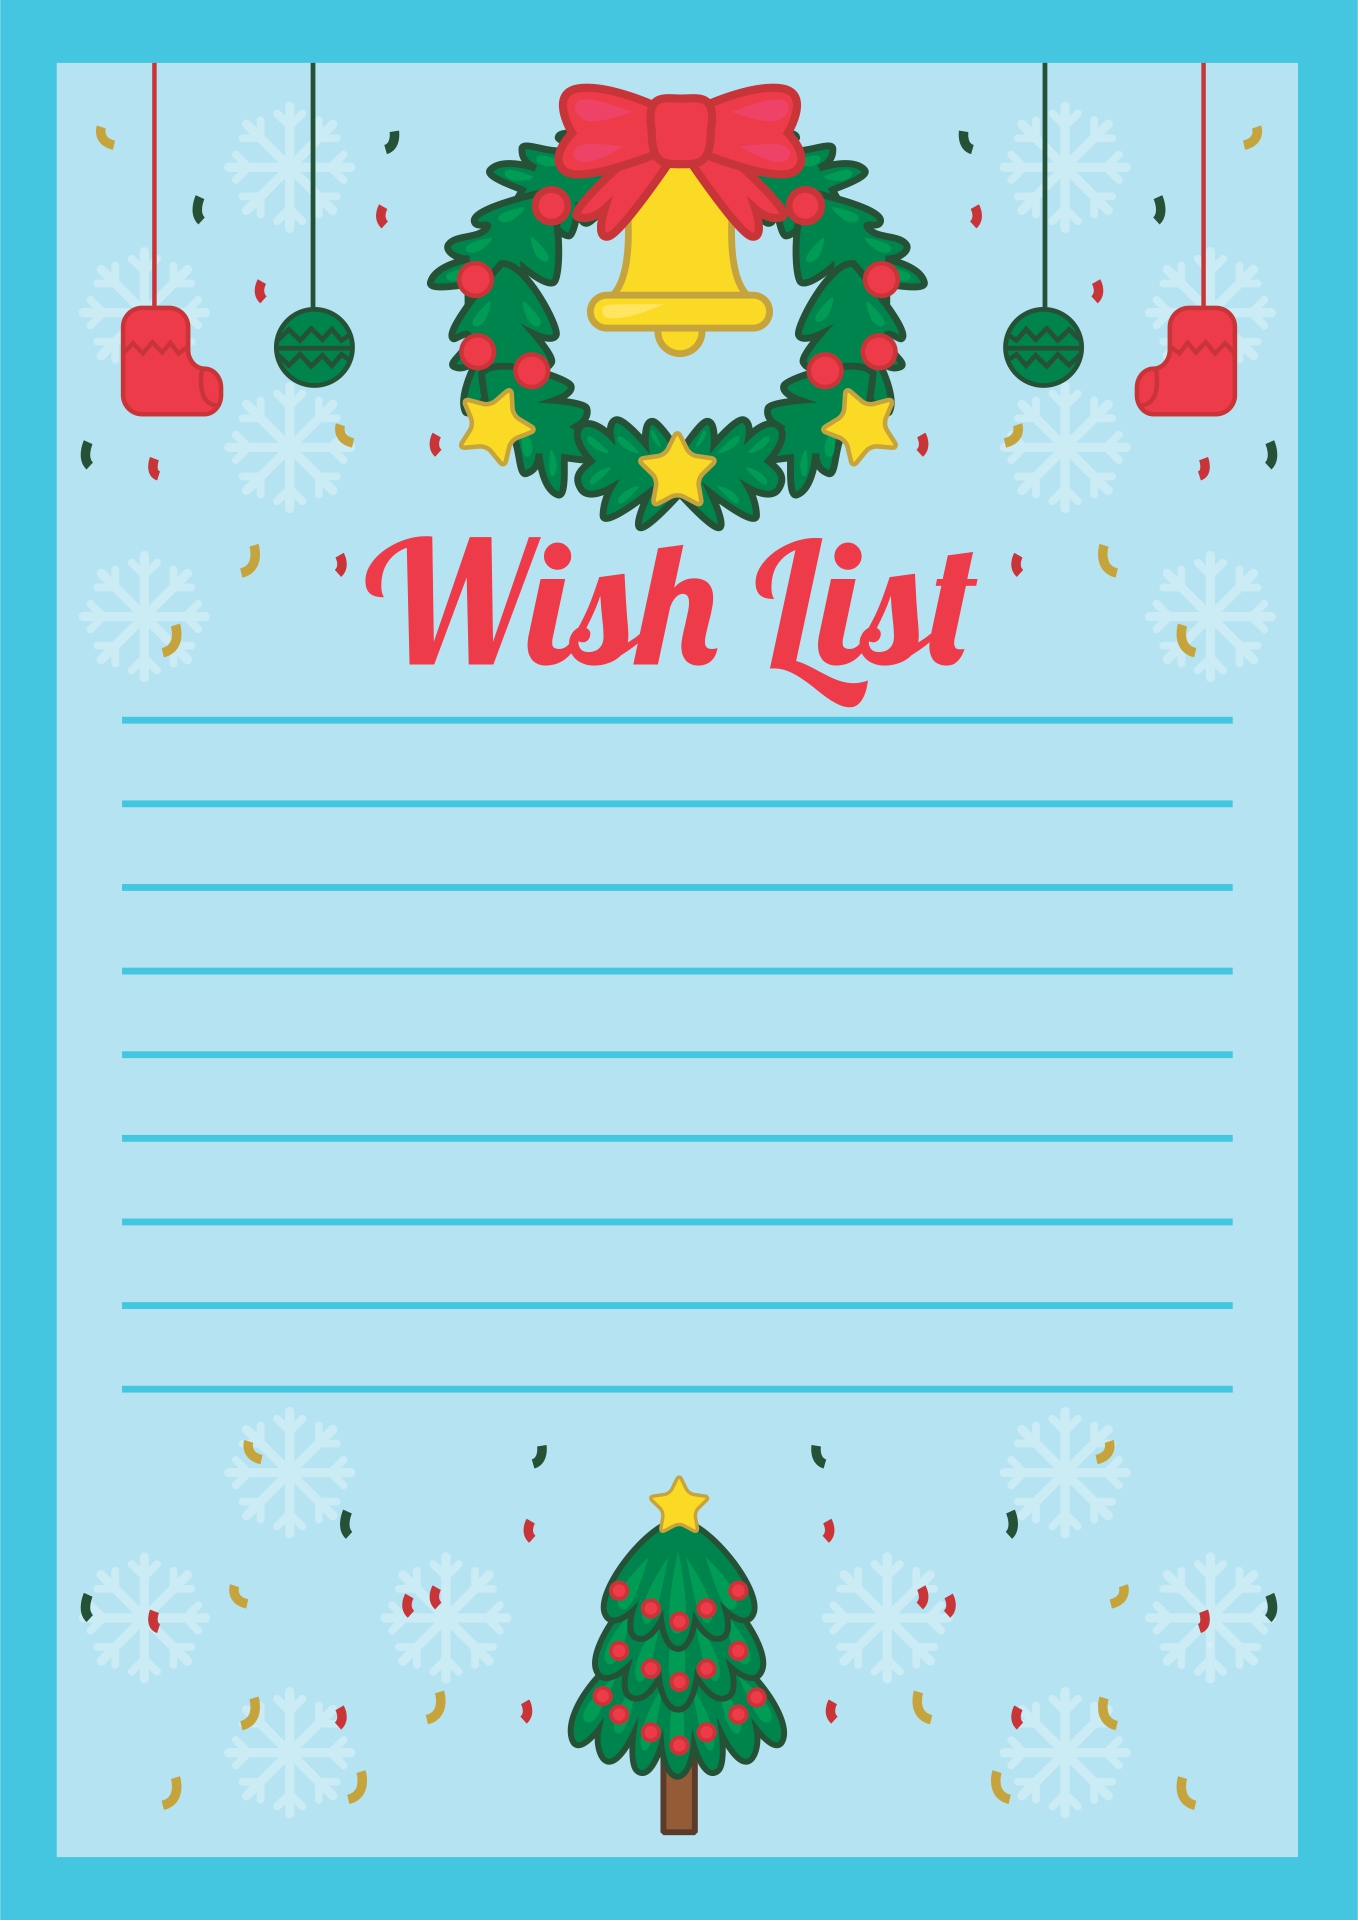 Christmas Printable Images Gallery Category Page 17 Printablee